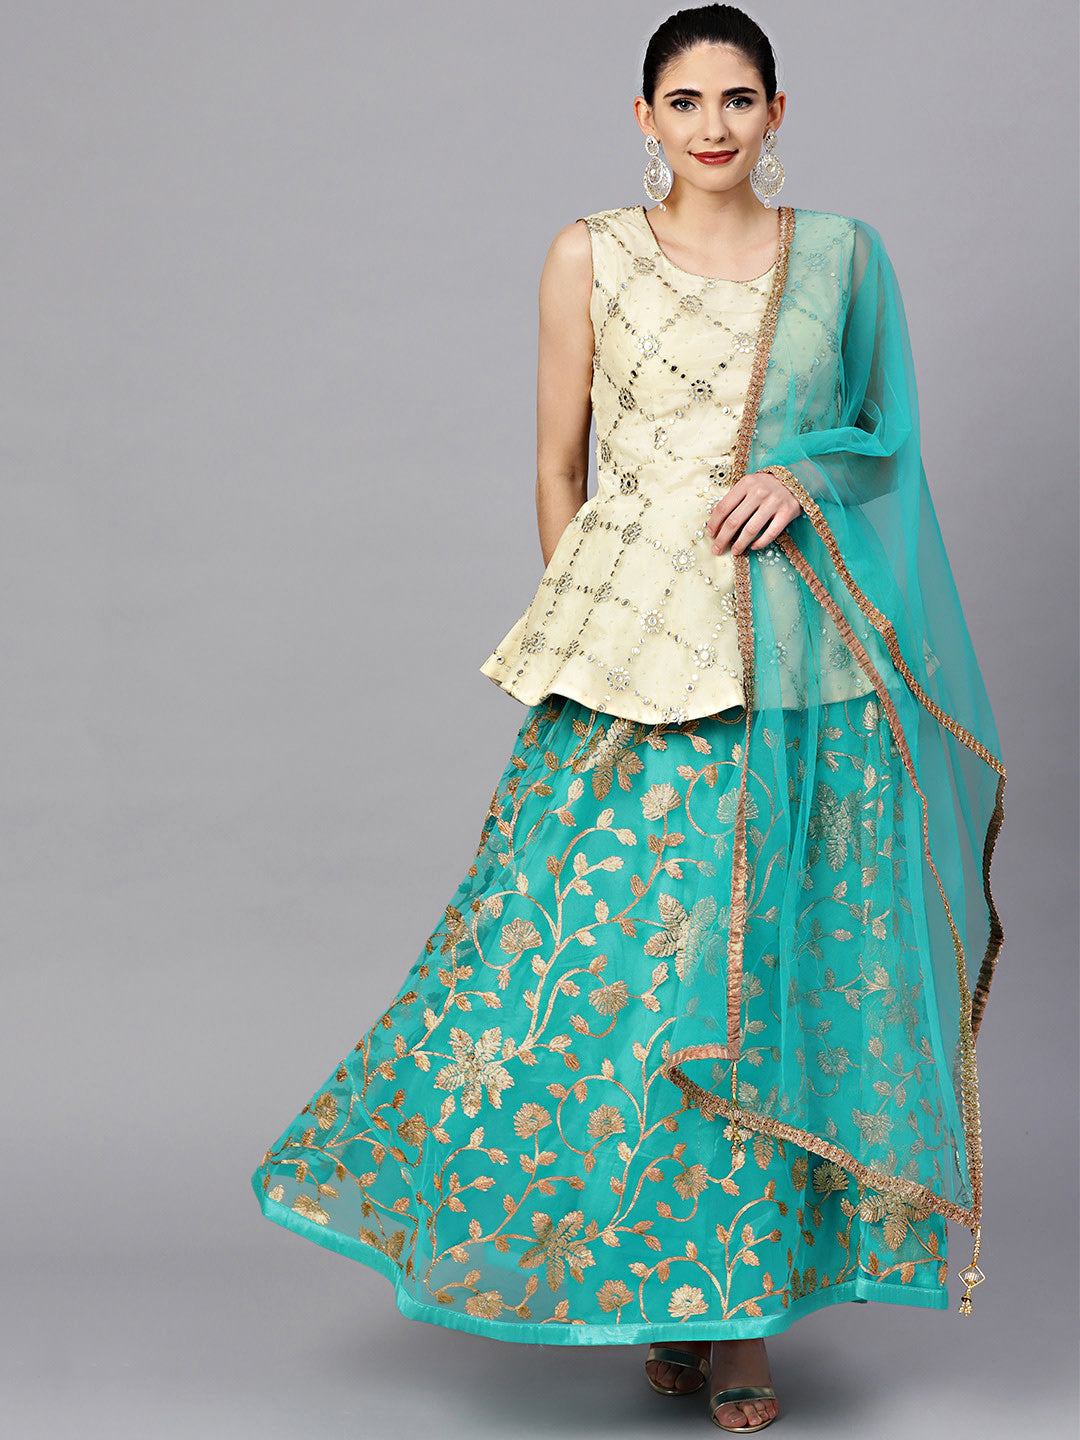 Handcrafted Lehenga with Peplum in Bottle Green Color